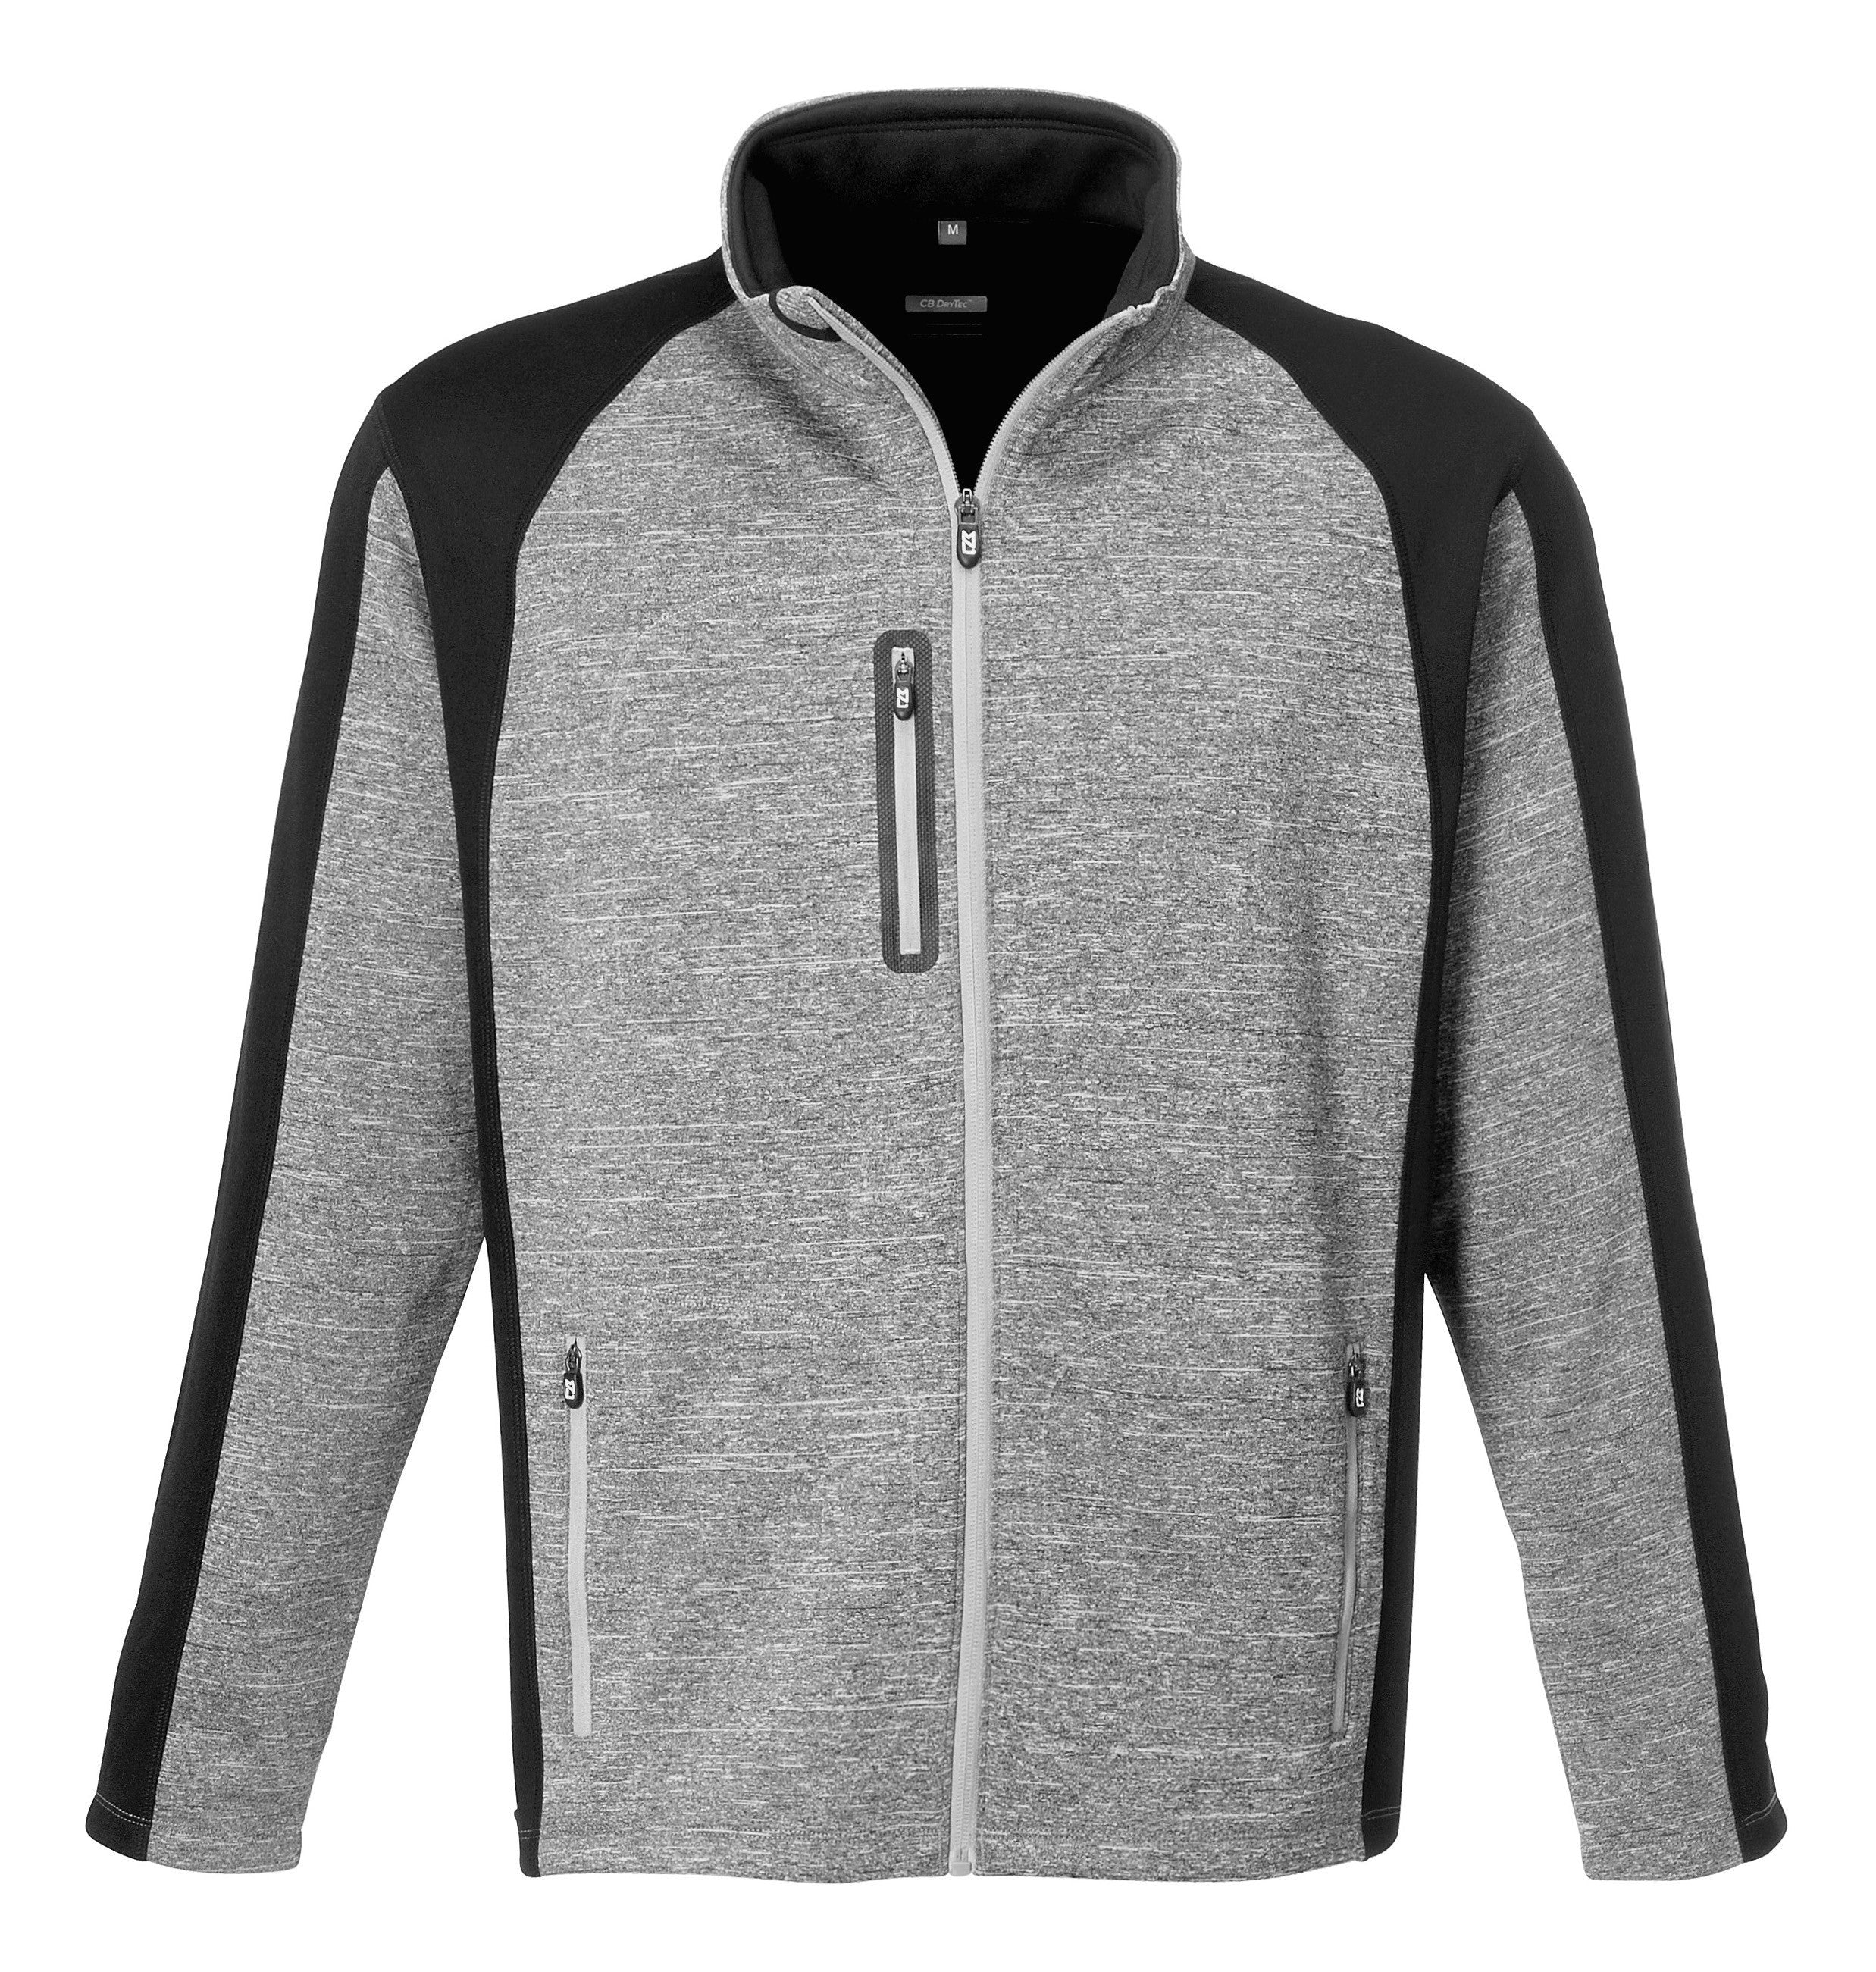 Mens Mirage Softshell Jacket - Grey Only-L-Grey-GY